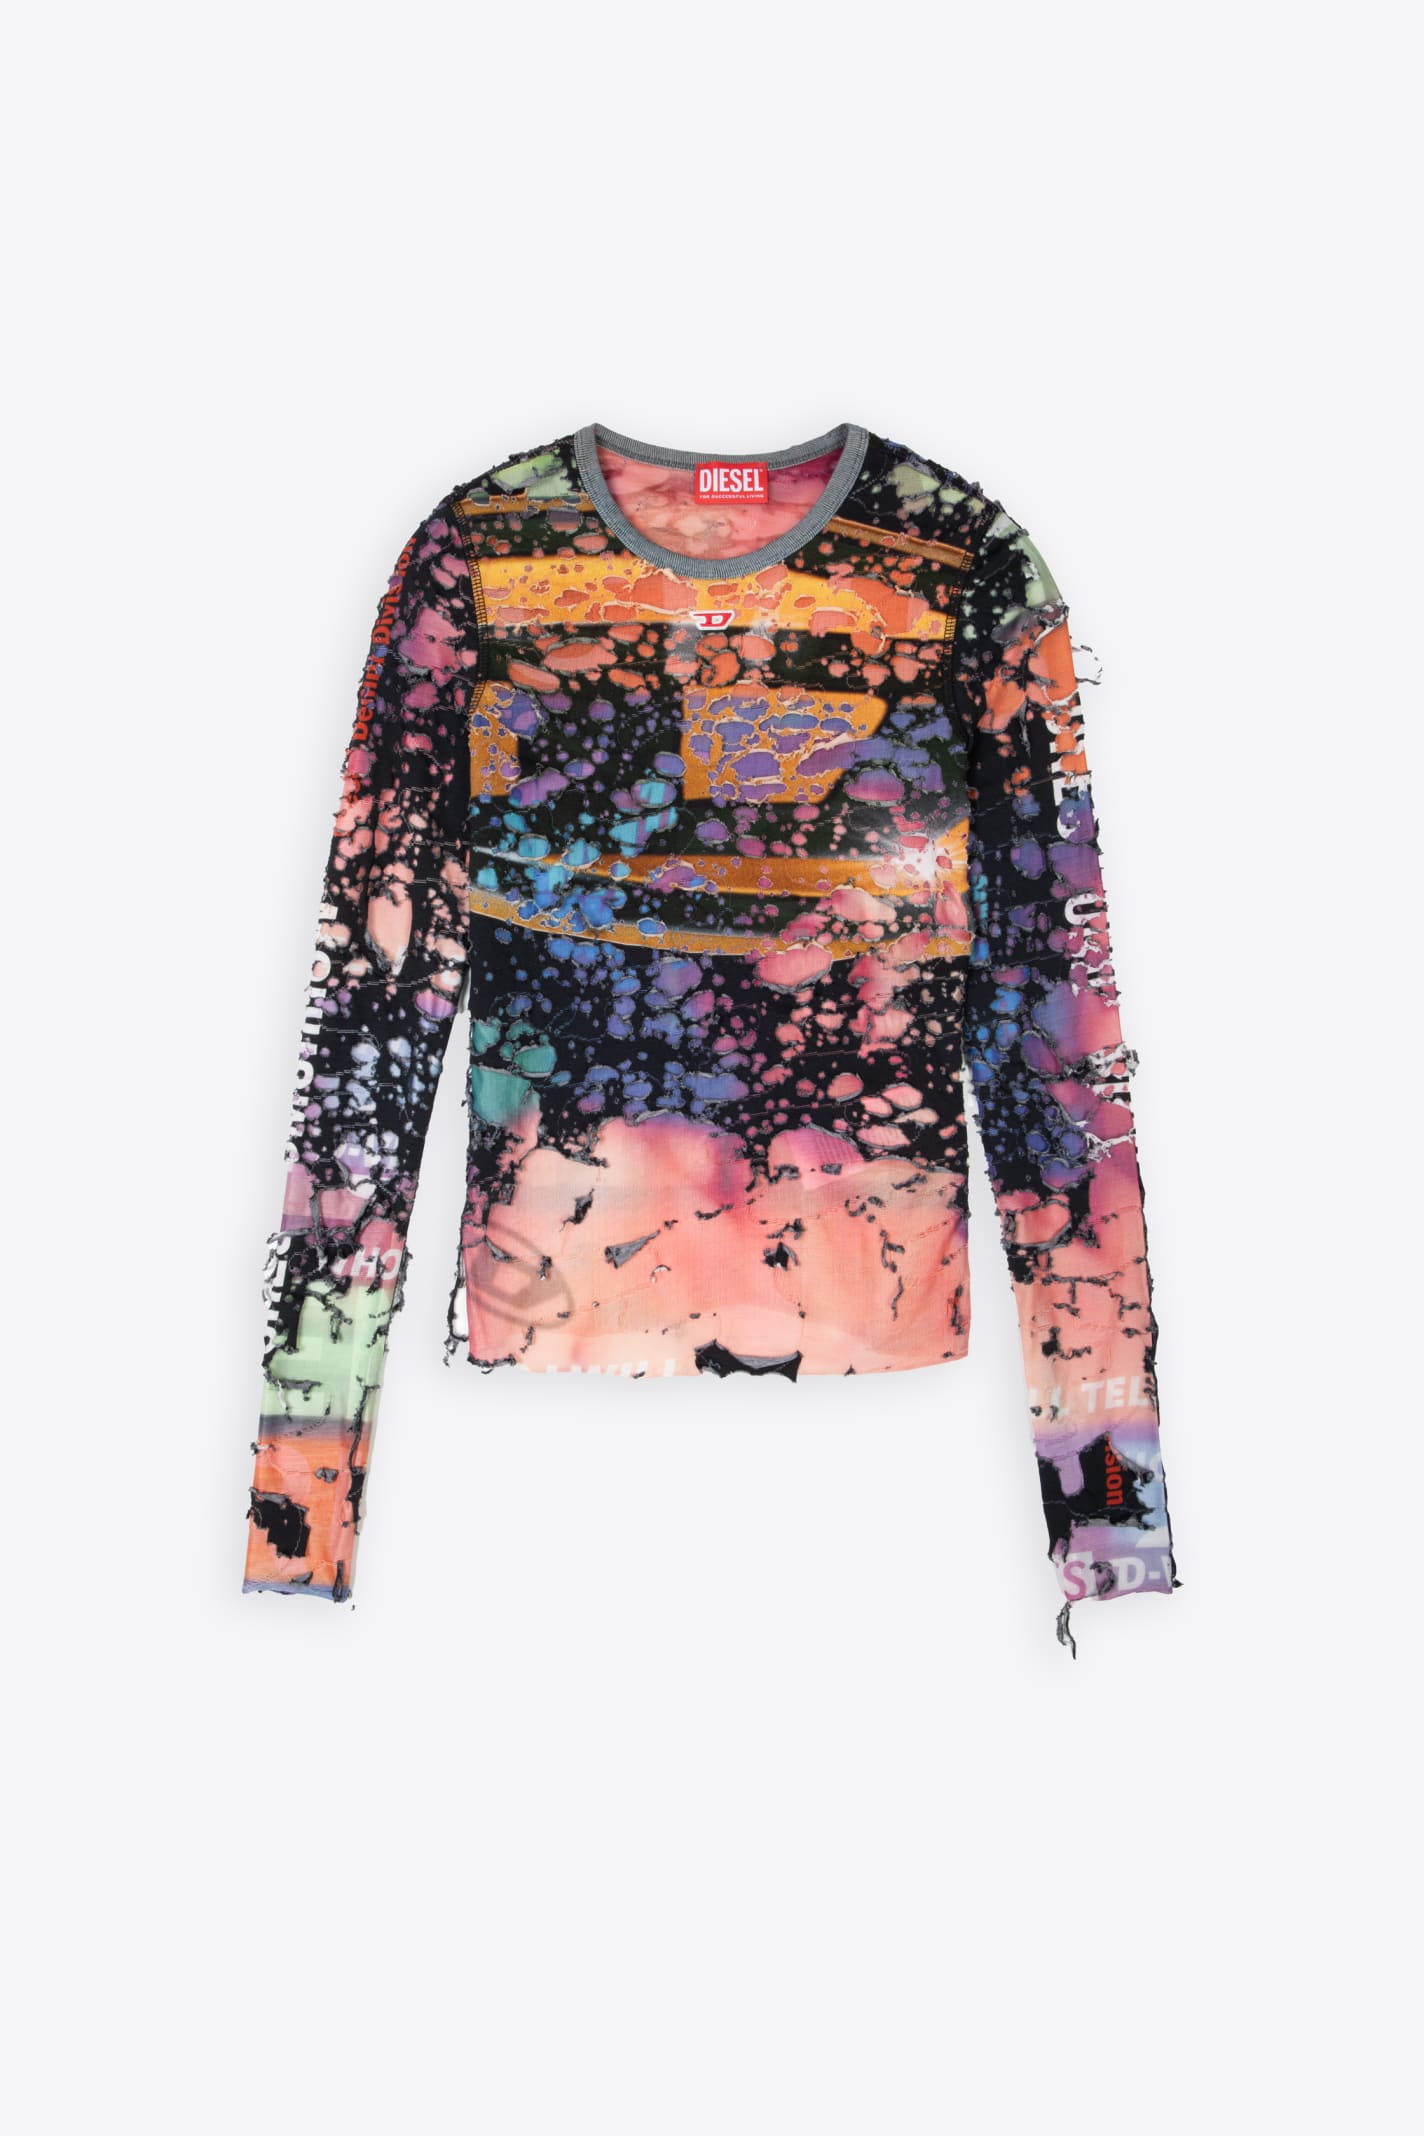 Shop Diesel T-miley Multicolour Destroyed Jersey Long Sleeves Top - T Miley In Multicolor